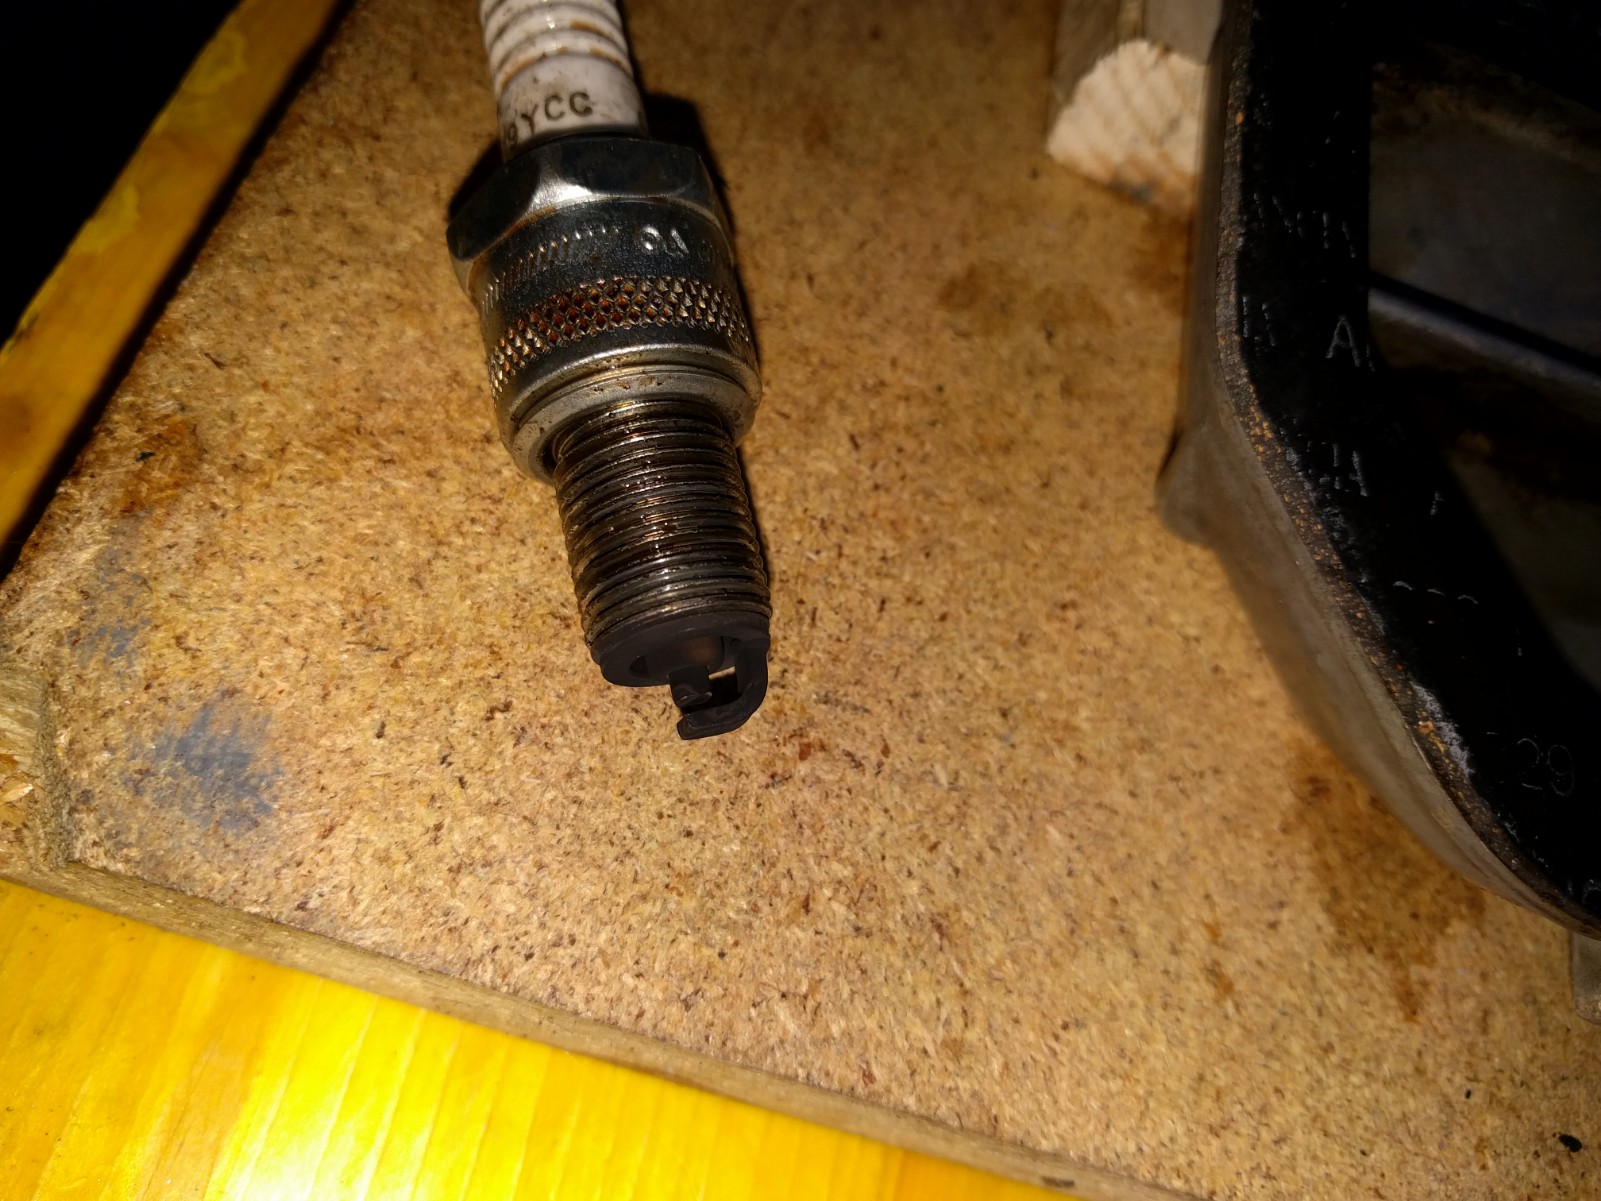 Sparkplug with carbon build up.